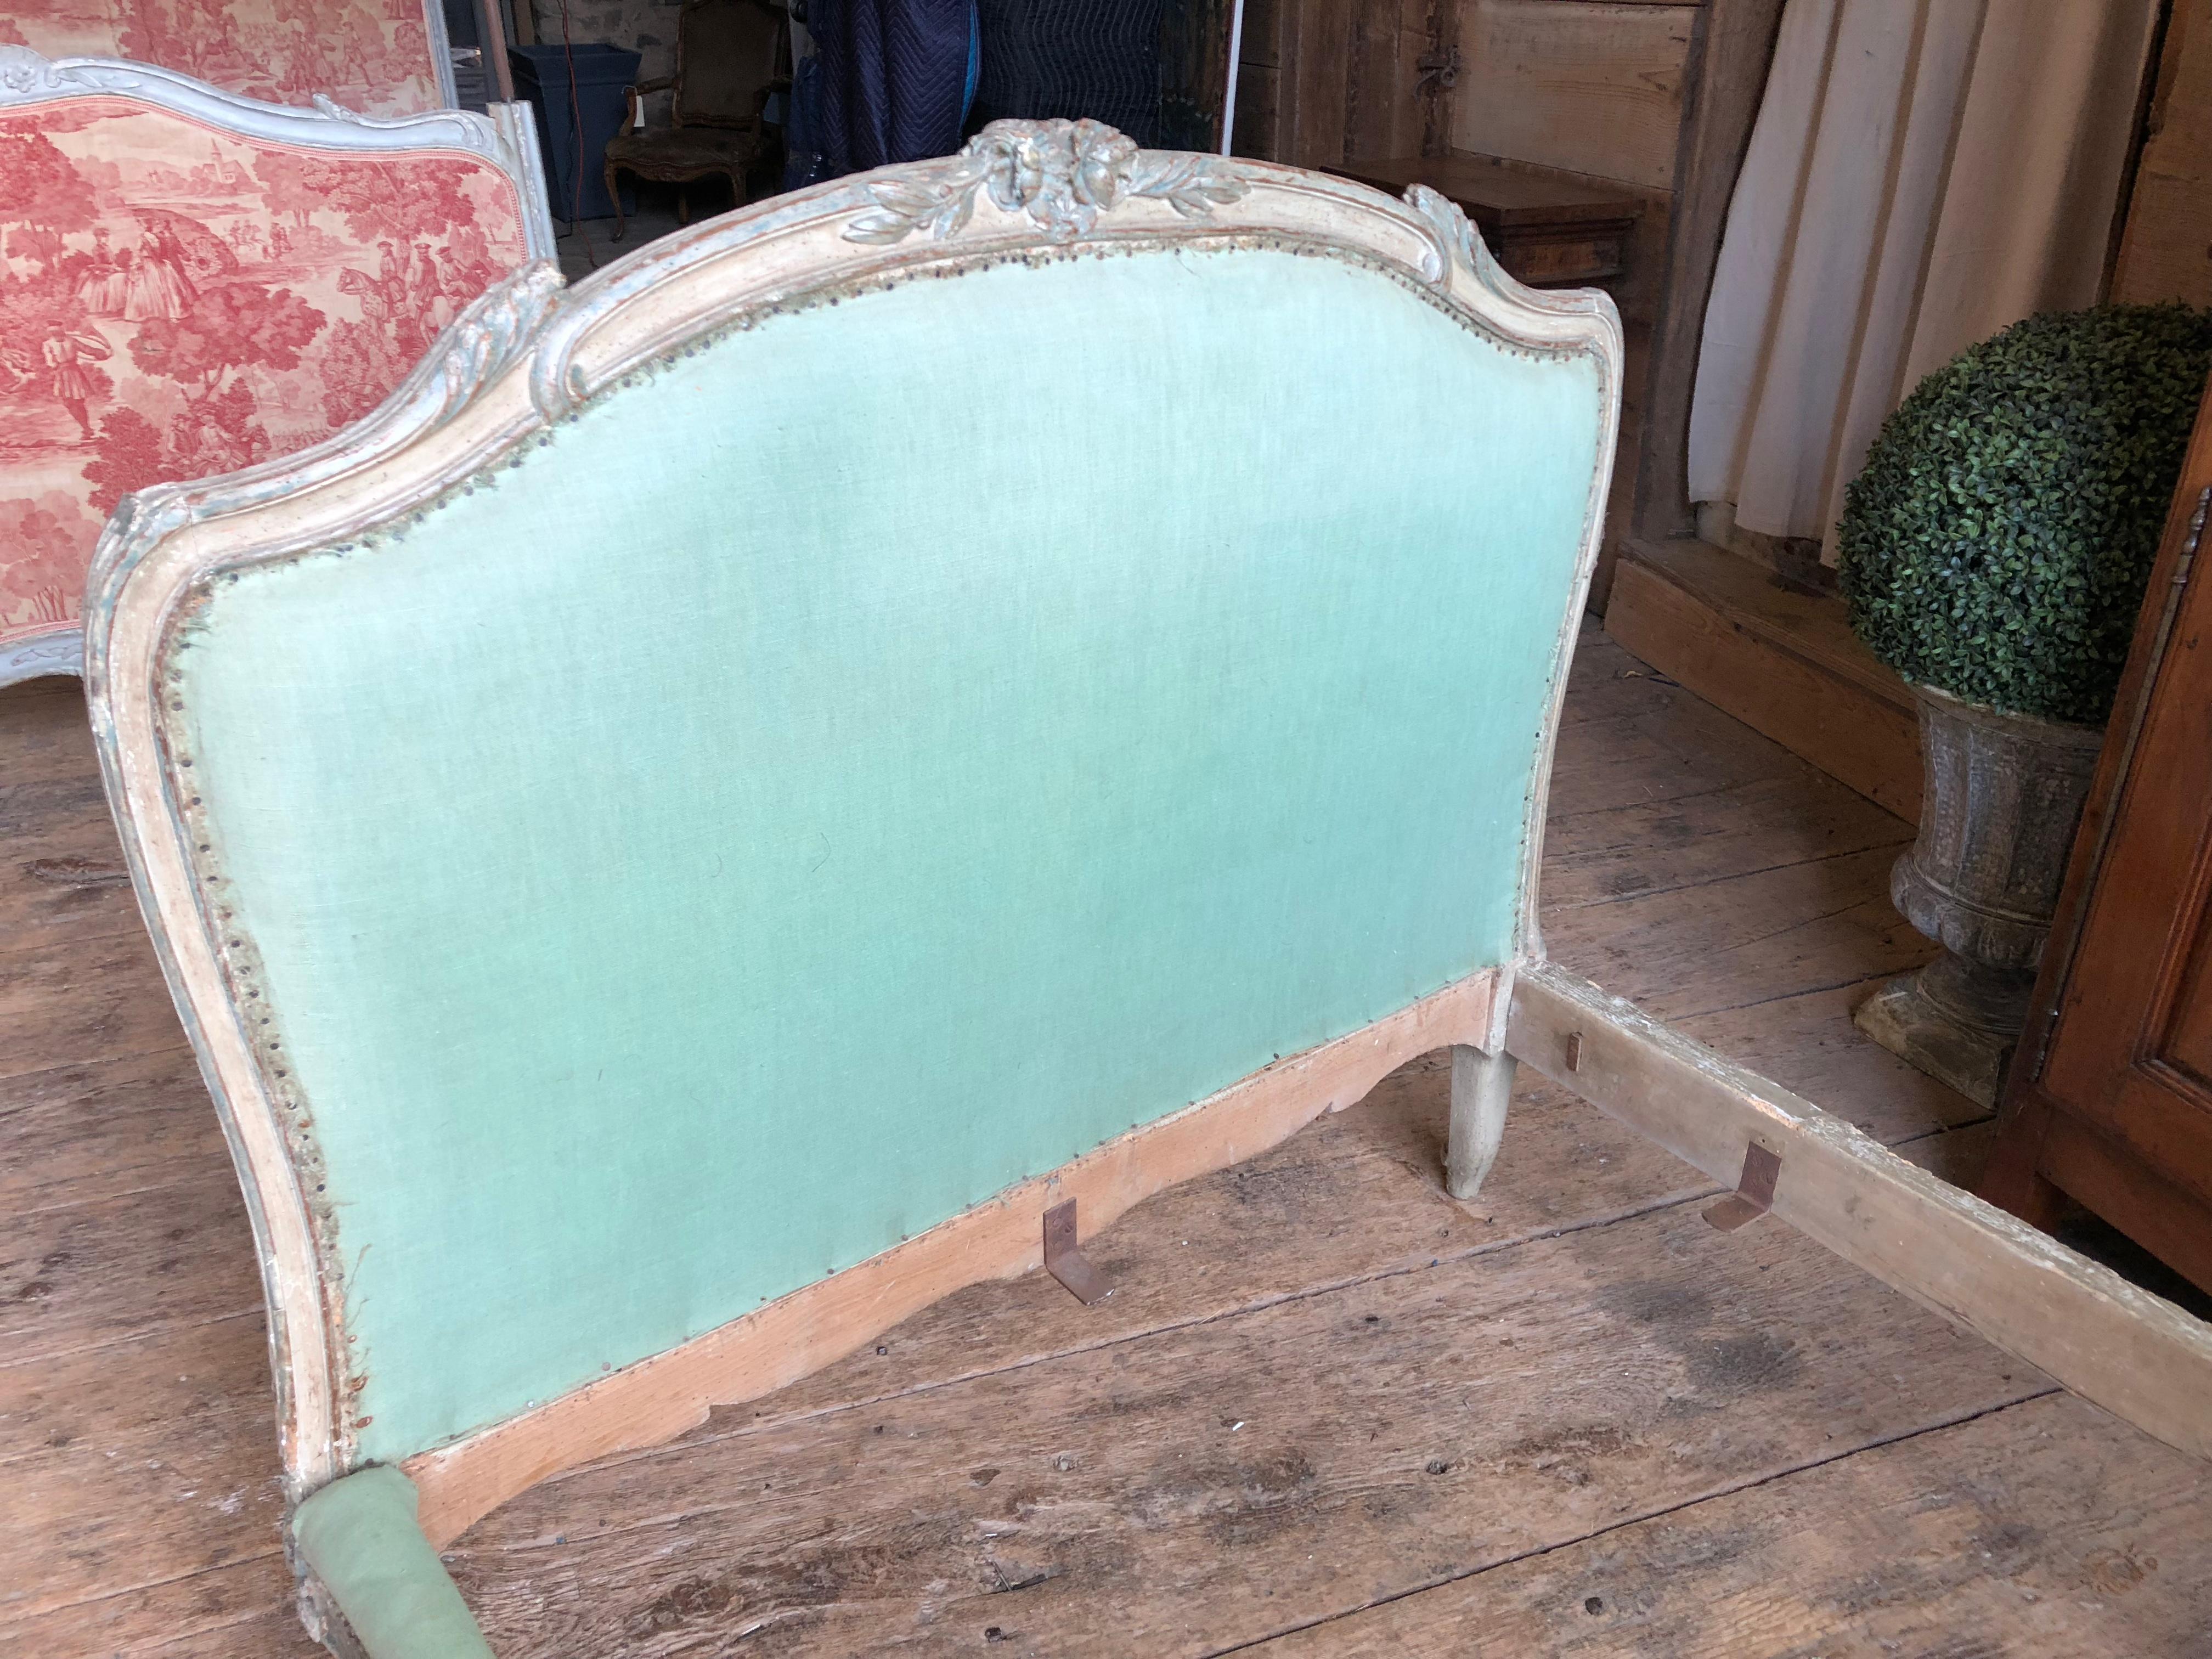 A charming Louis XV period bed, nicely carved and painted cream with blue or green highlights, circa 1760, with upholstered head and footboard, designed to go sideways against the wall, as the front rail is serpentine n shape, while the back rail is